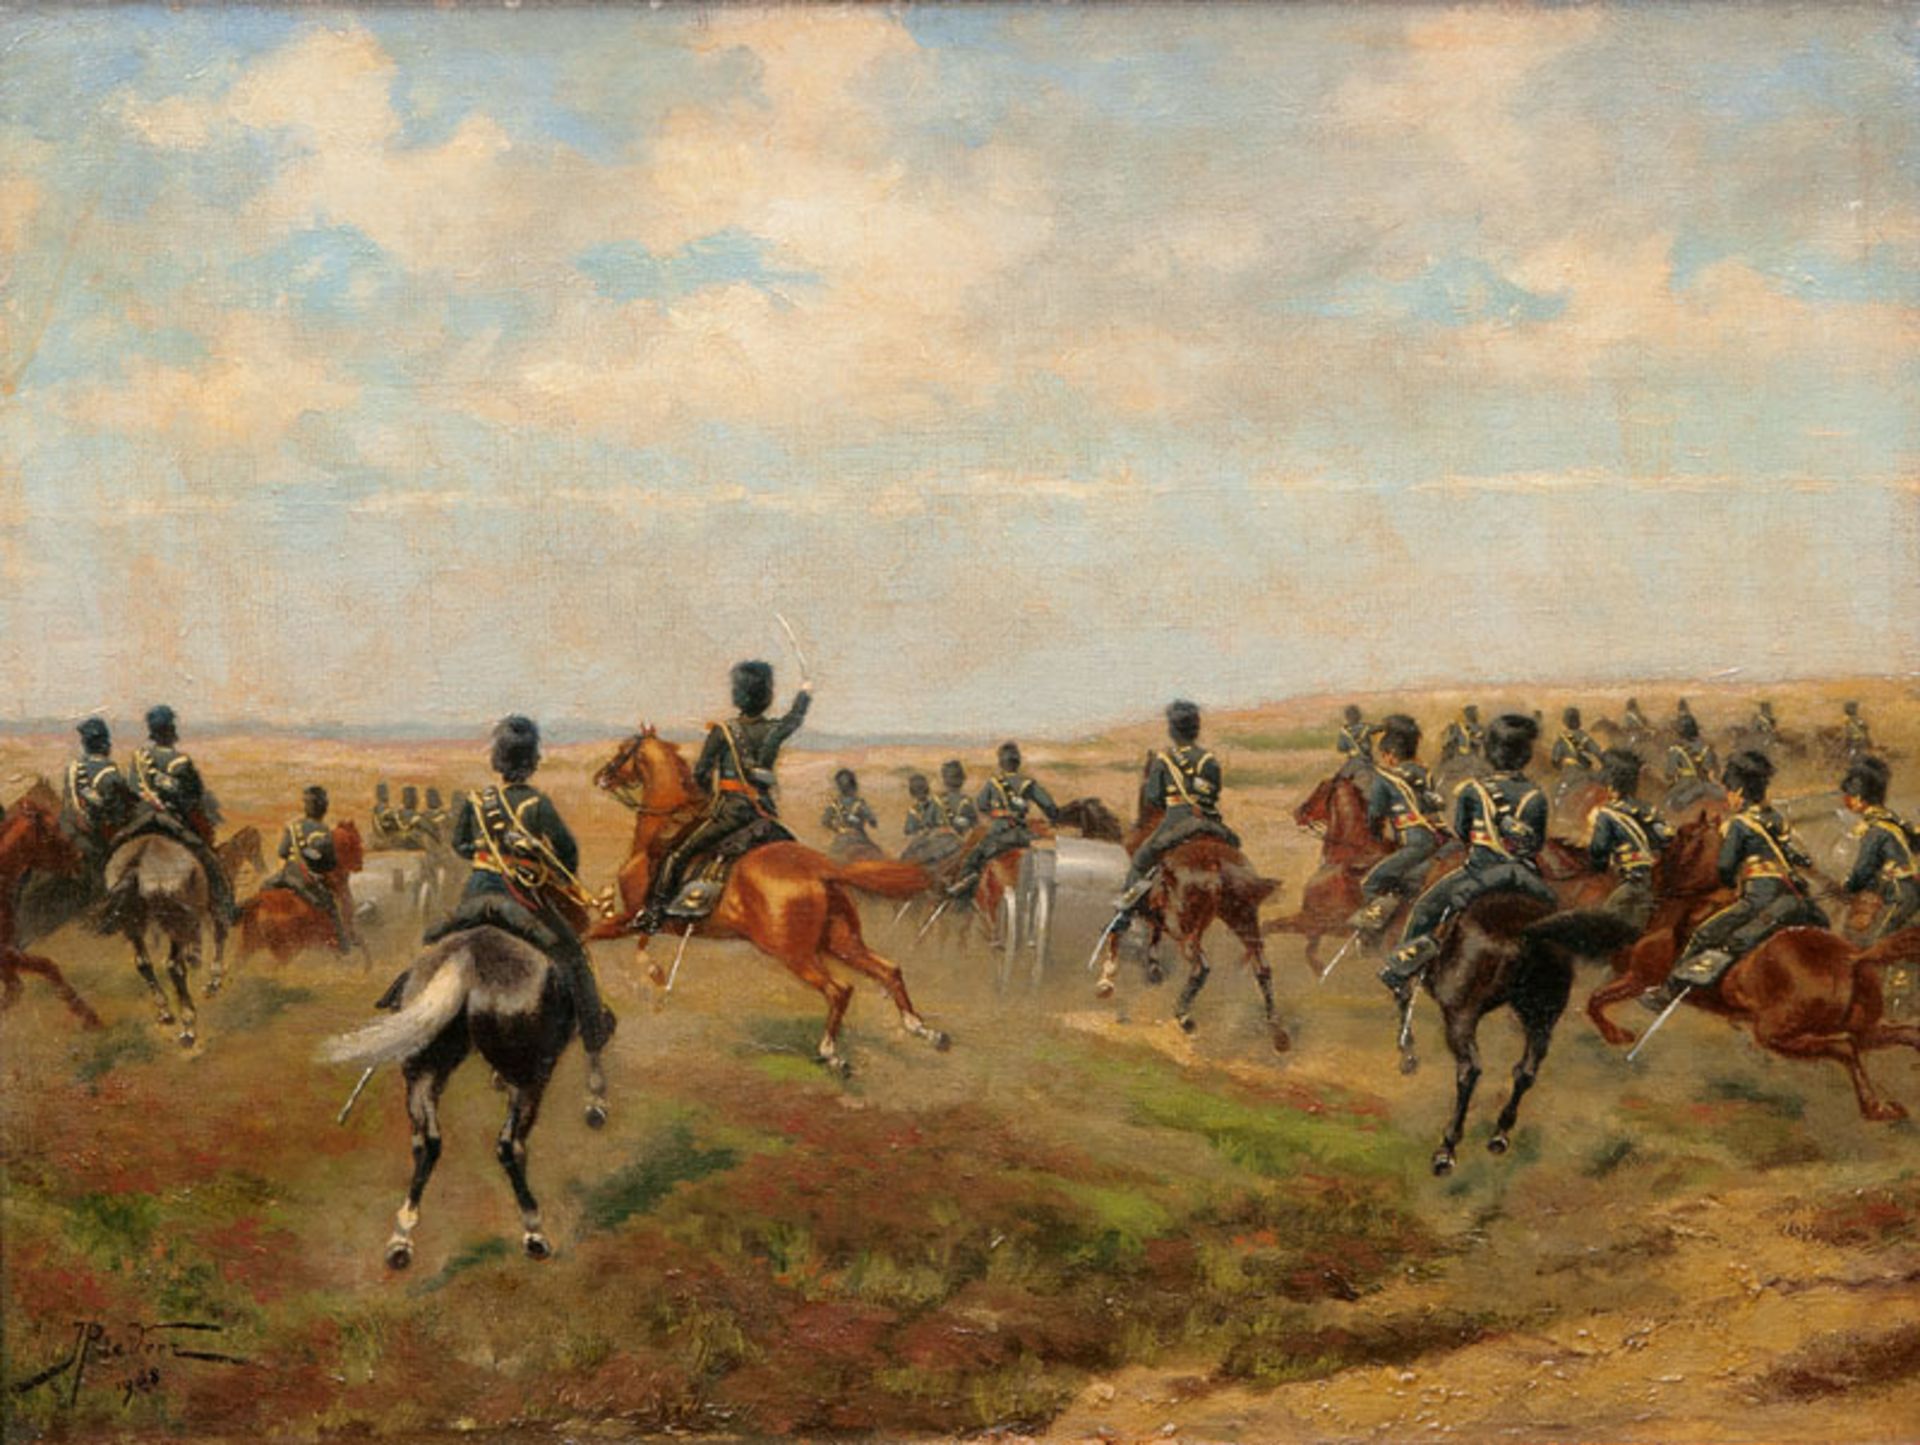 Veer (Ngawi/Java 1845 - Den Haag 1921) Attacking Cavalry Oil/canvas, 35 x 46,5 cm, lo. le. sign.